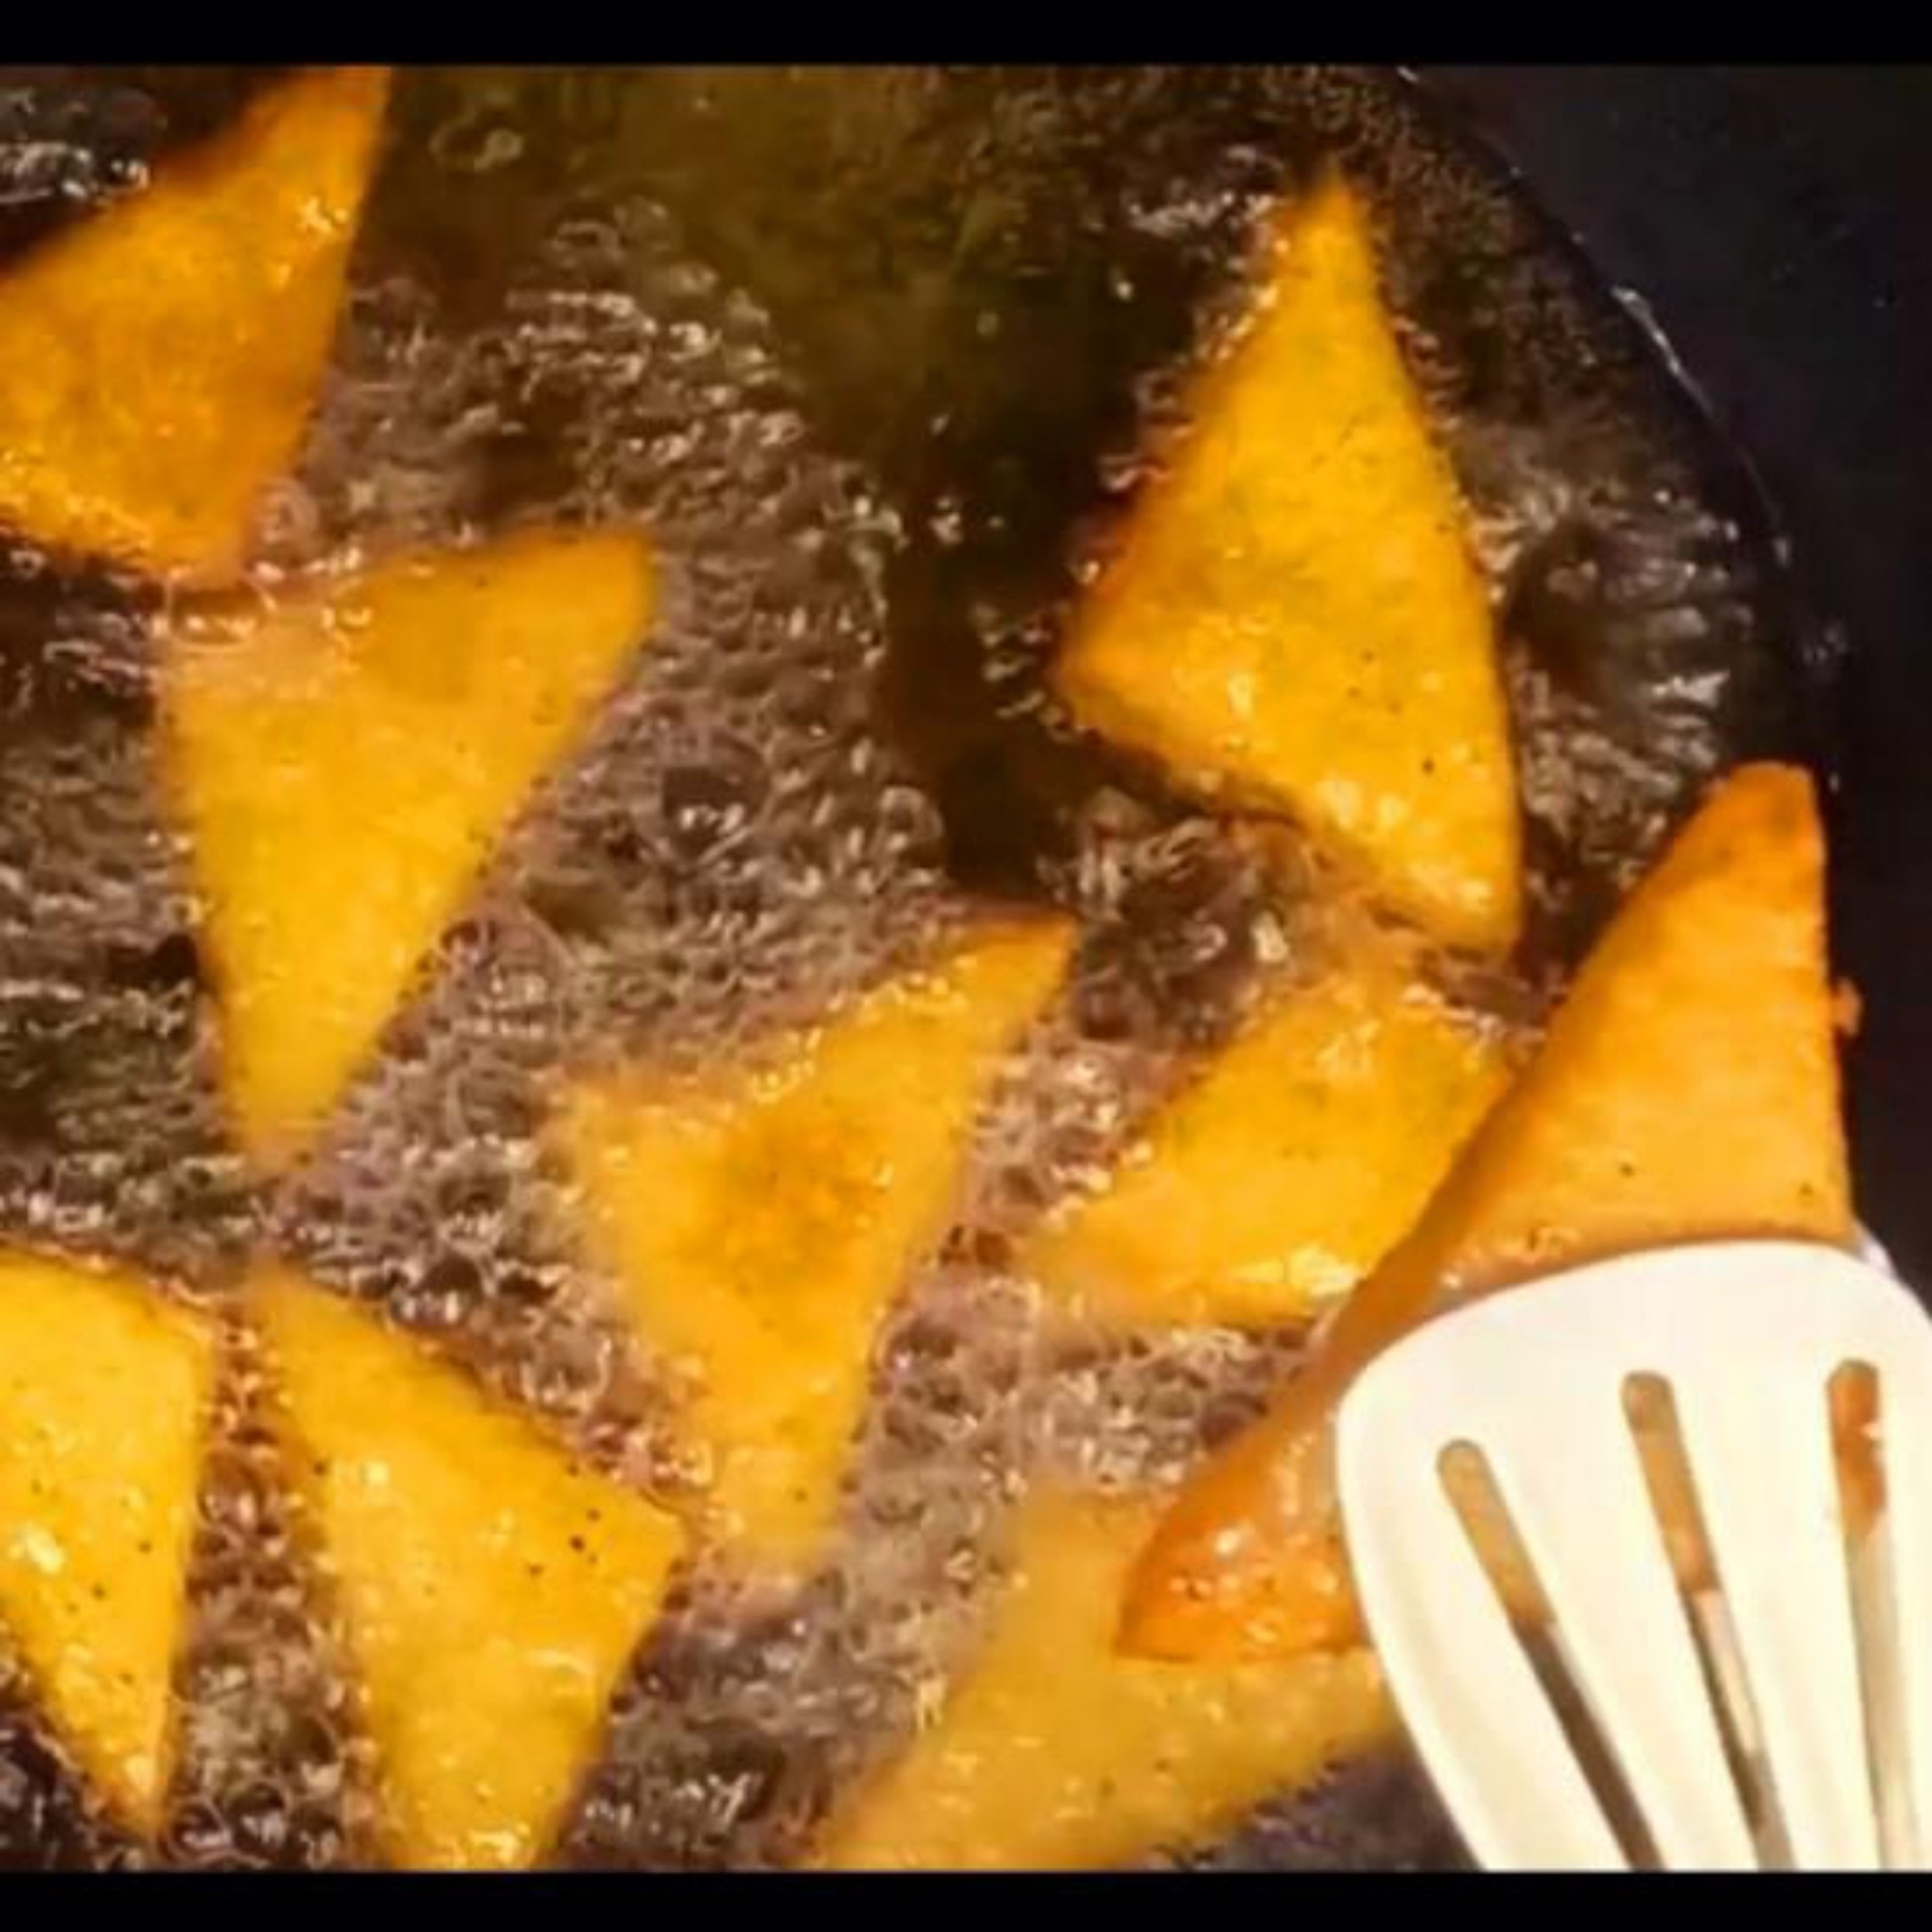 heat up Oil for frying, you can fry this in both types. deep fry or sallow fry, choice is all yours. fry until it turns into go